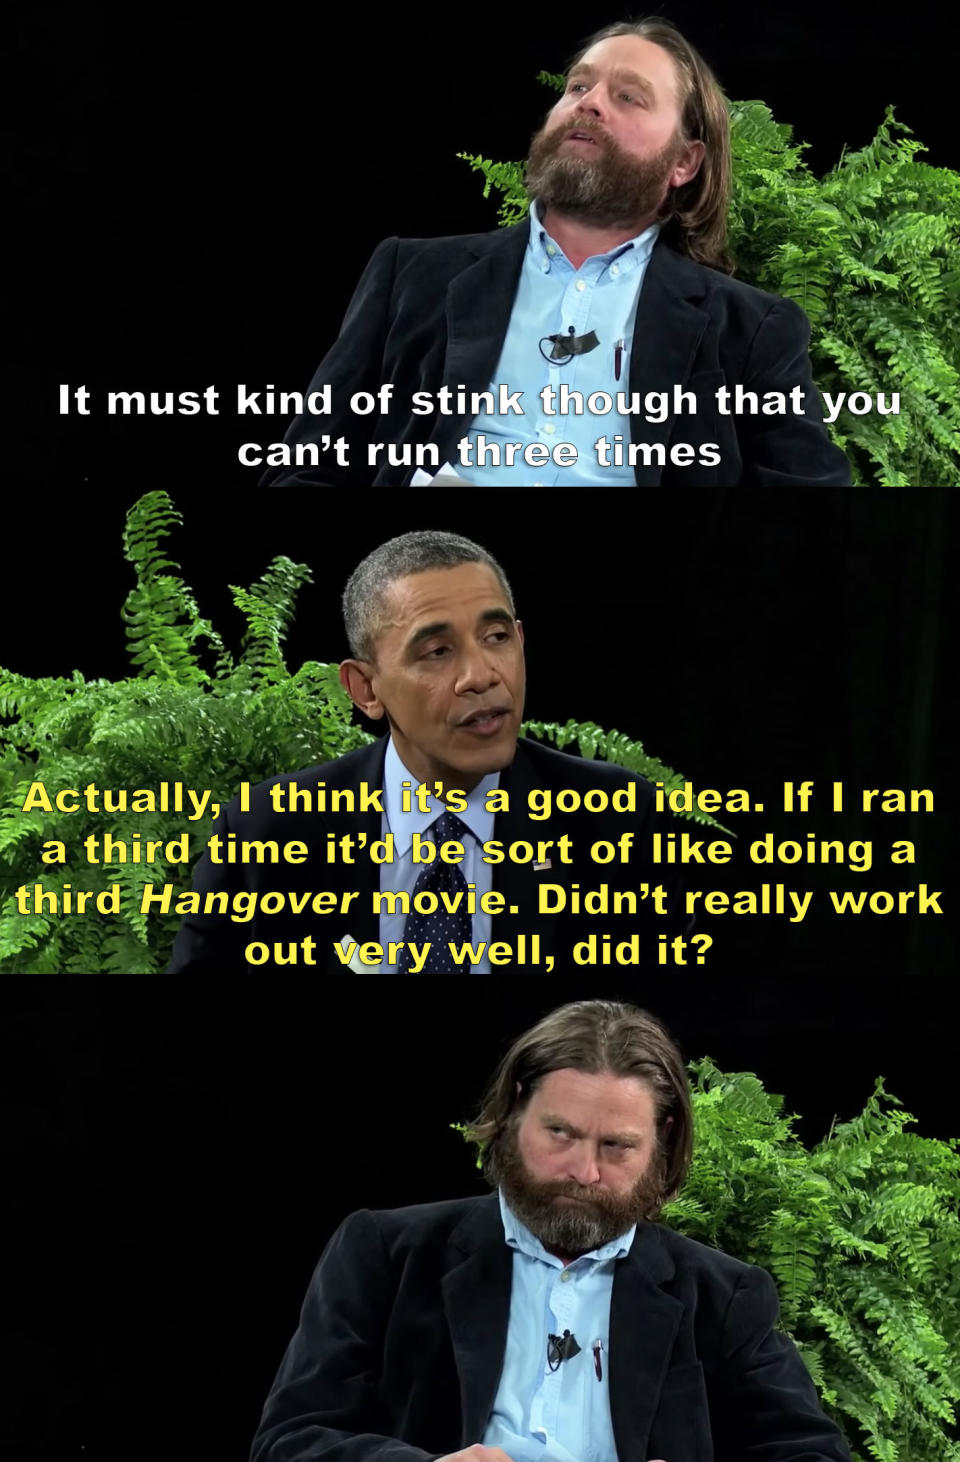 Zach: It must kinda stink though that you can't run three times Obama: Actually, I think it's a good idea. If I ran a third time, it'd be sort of like doing a third Hangover movie. Didn't really work out very well, did it?